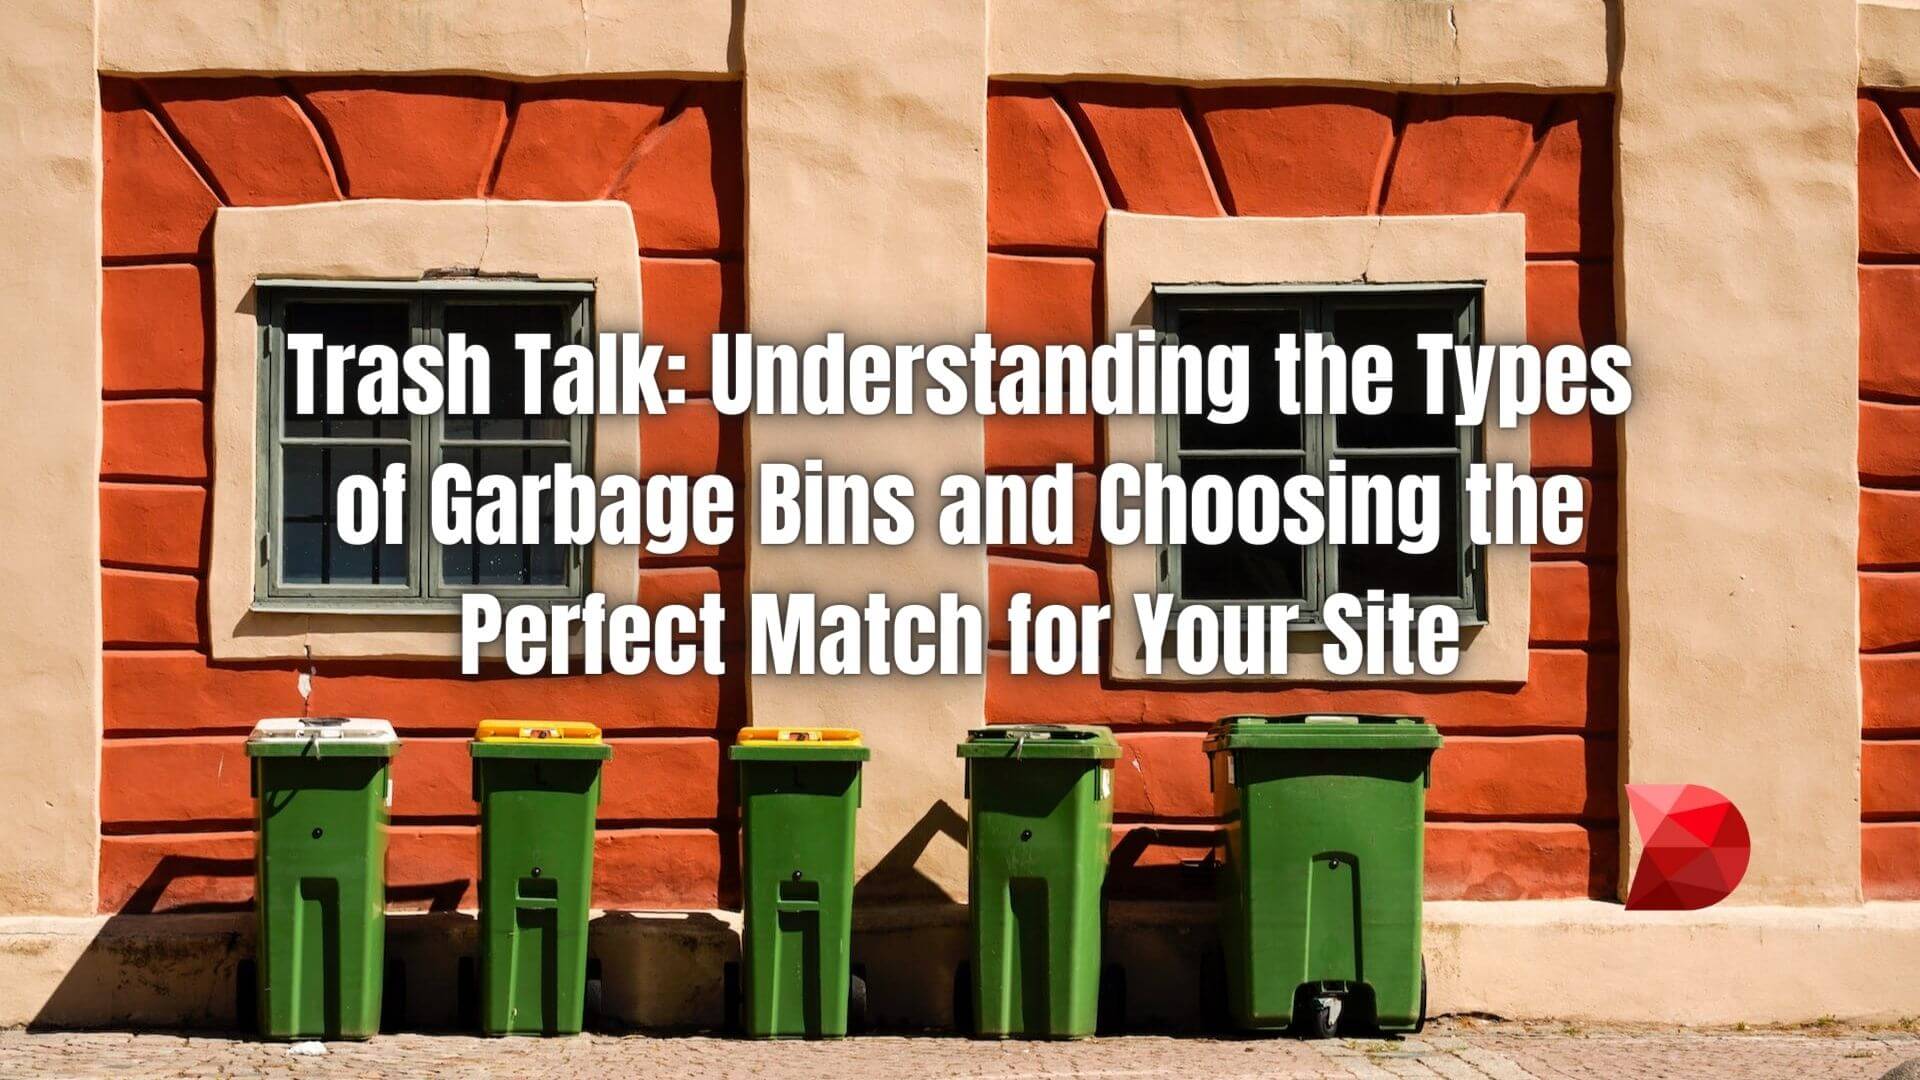 Optimize waste disposal efficiently! Click here to learn about various garbage bin types and pick the perfect match for your site.